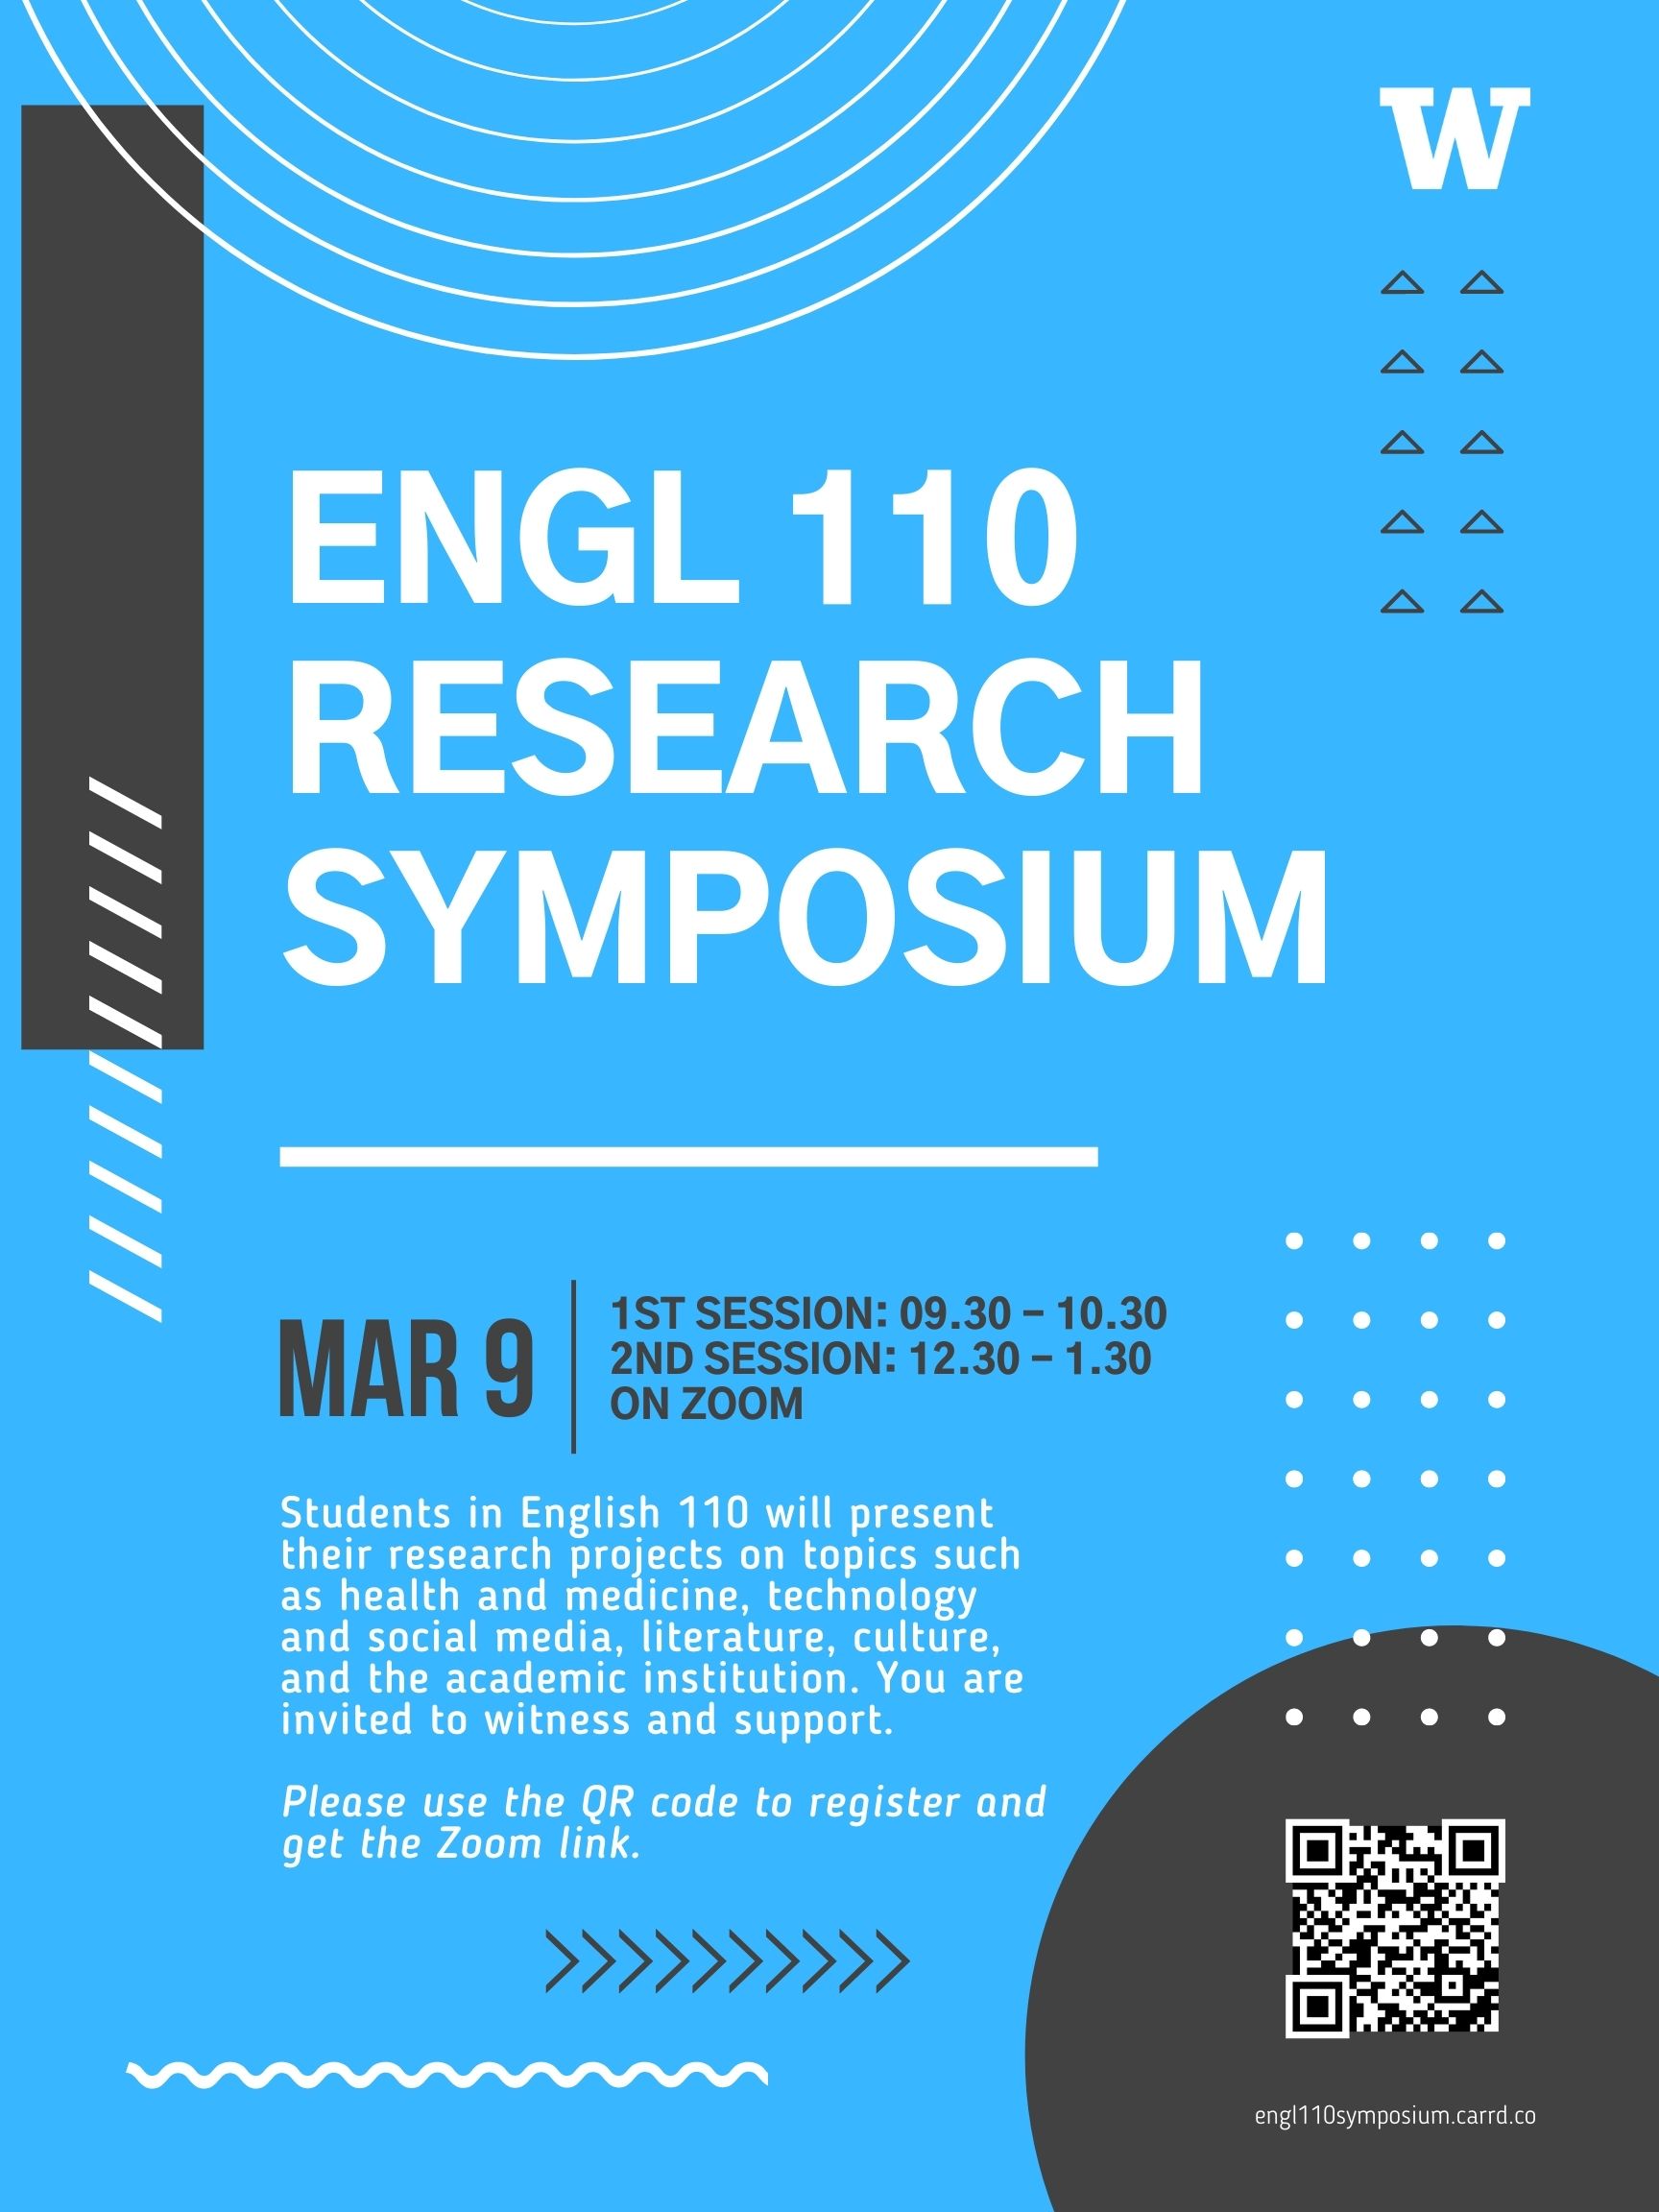 ENGL 110 Symposium Flyer March 9 at 9:30 & 12:30